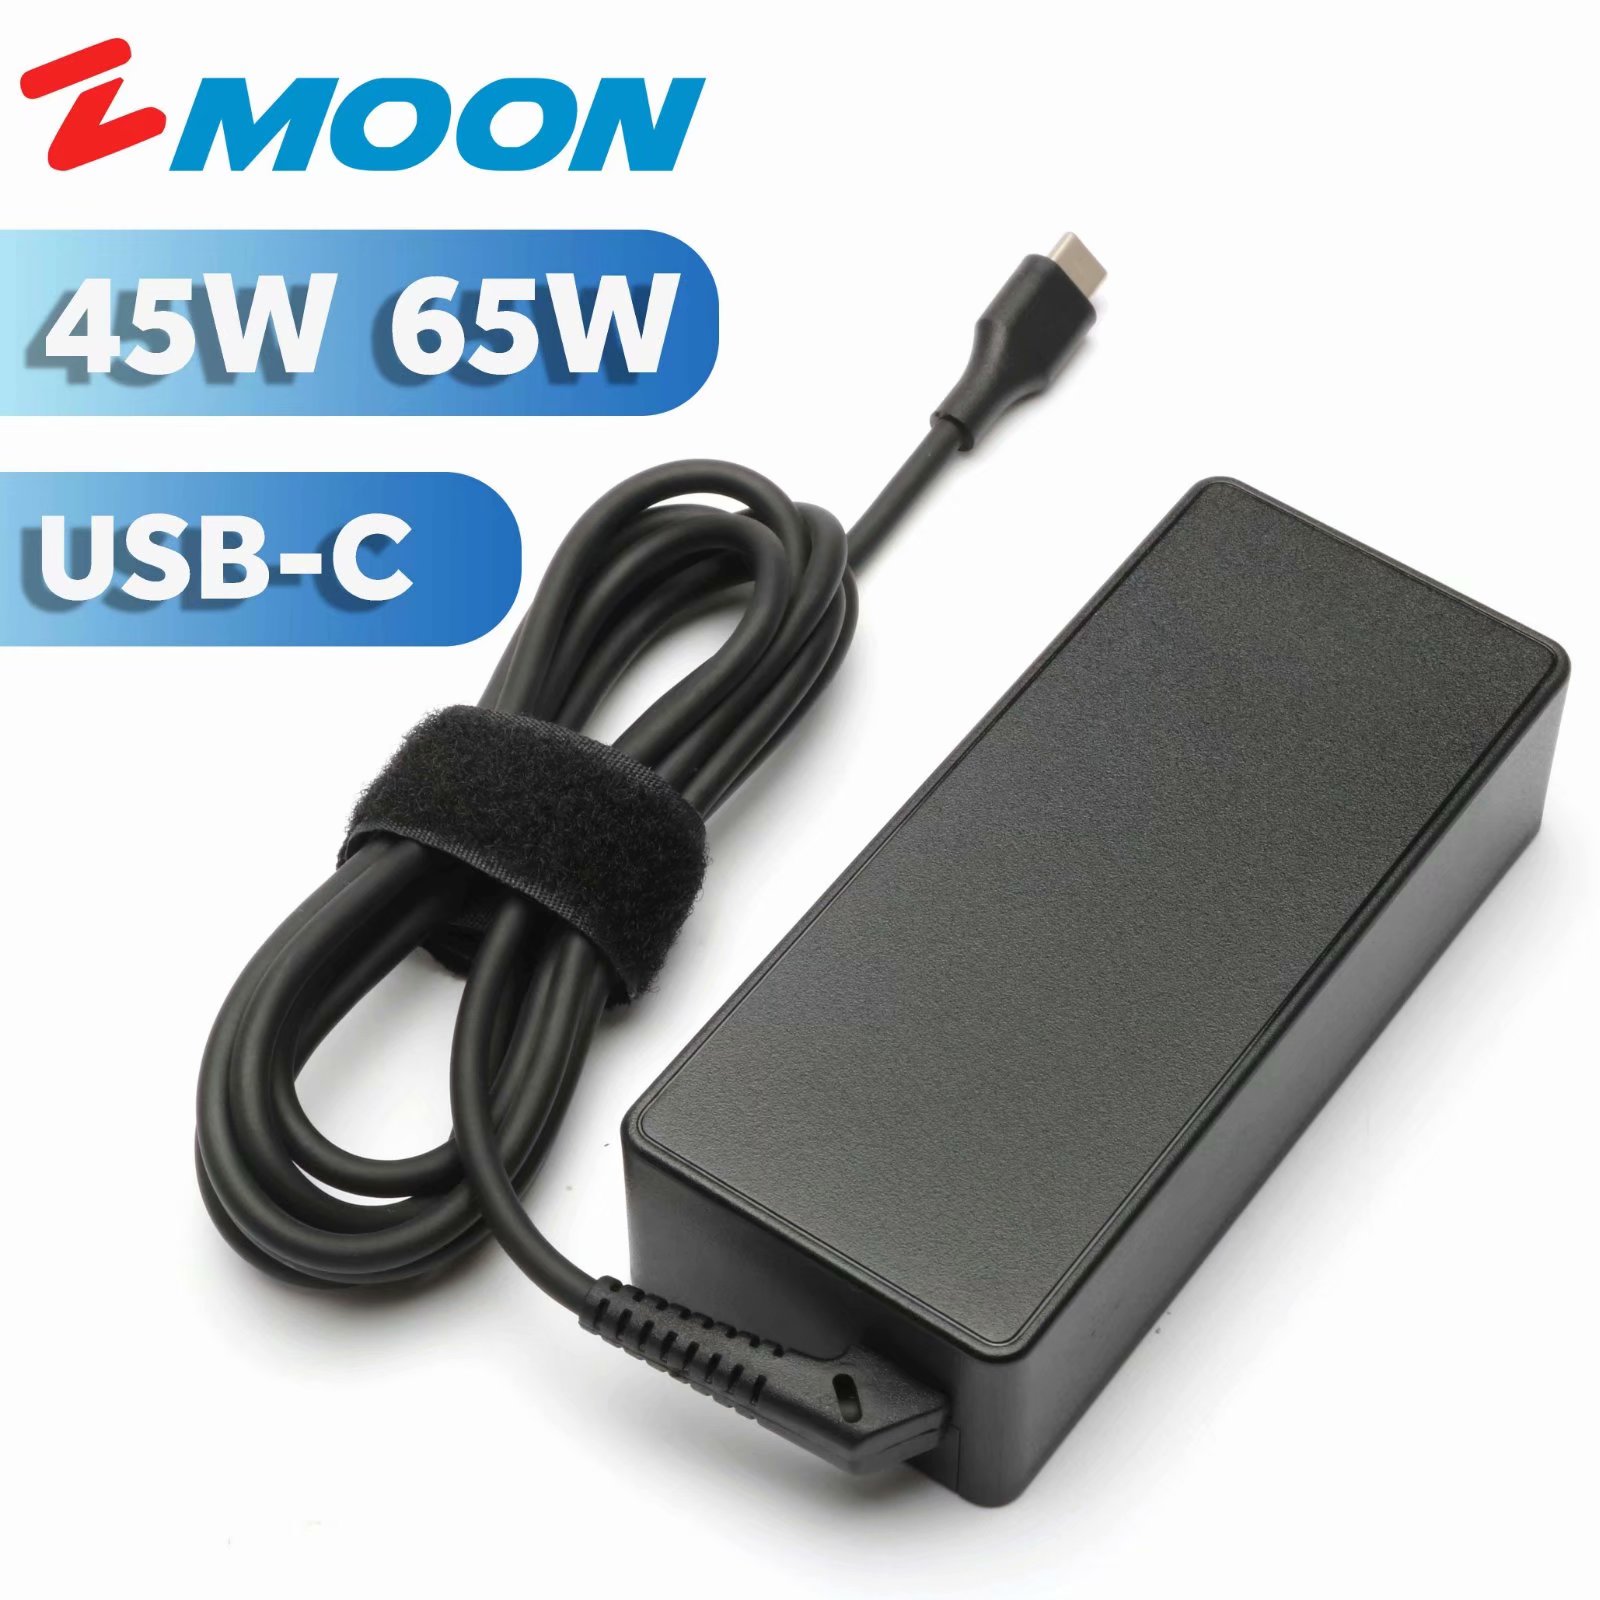 Laptop Charger for Lenovo 65w USB-C USB Type C USBC Thinkpad X1 T480 T580 T470 Yoga C930 720 S730 910 920 C630 GX20M33579 4X20M26268 Chromebook 330 S330 X270 X280 GX20P92530 Miix 720 Adapter - image 1 of 11